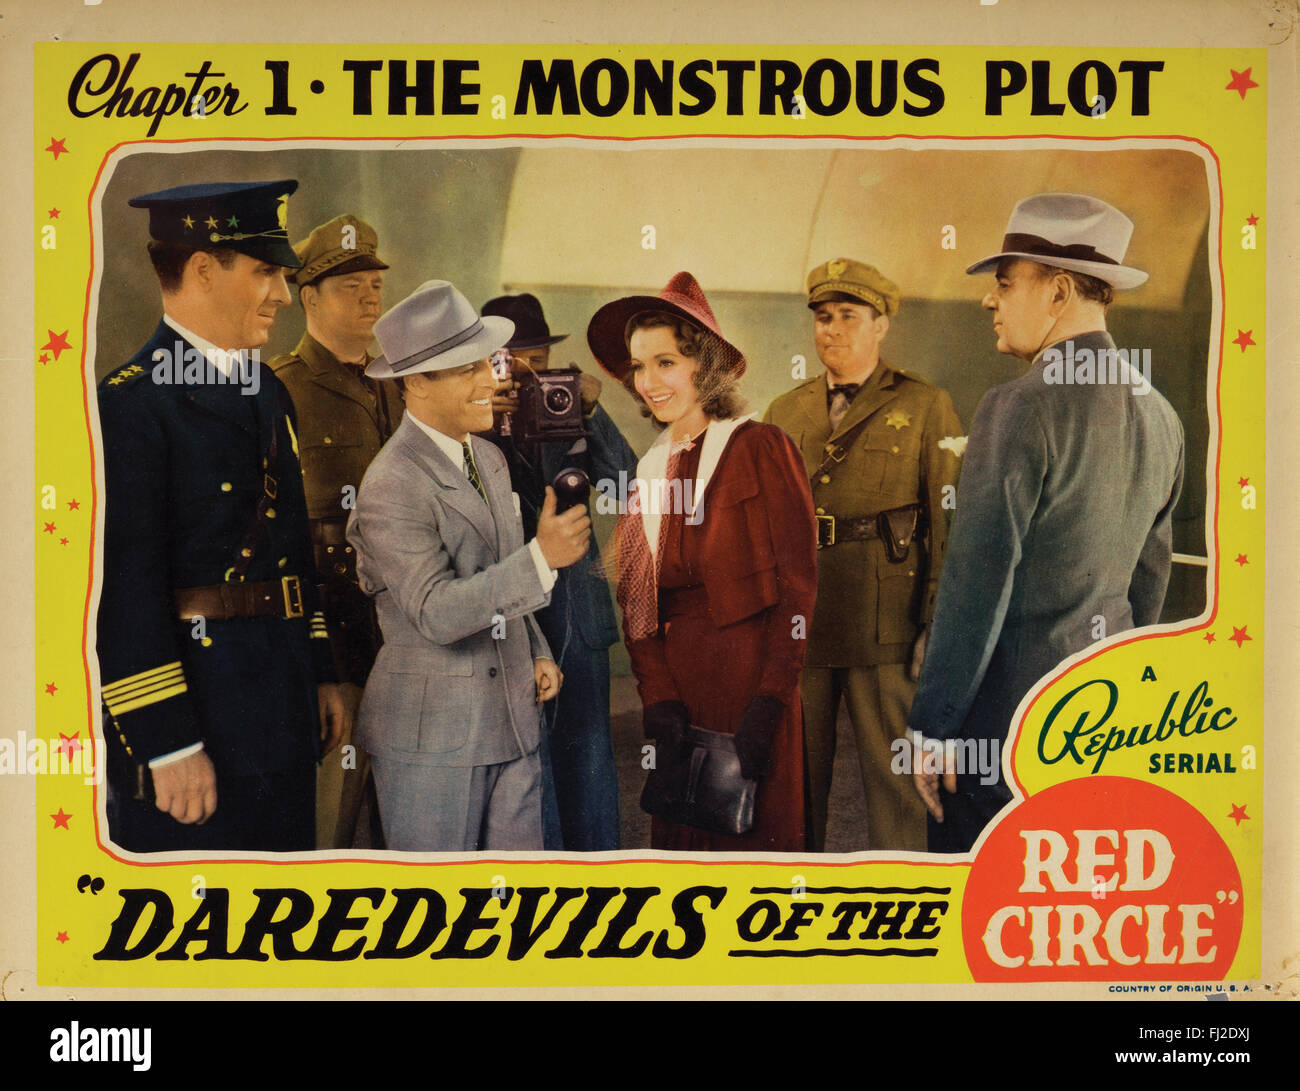 'Daredevils of the Red Circle', scene lobby card. Stock Photo